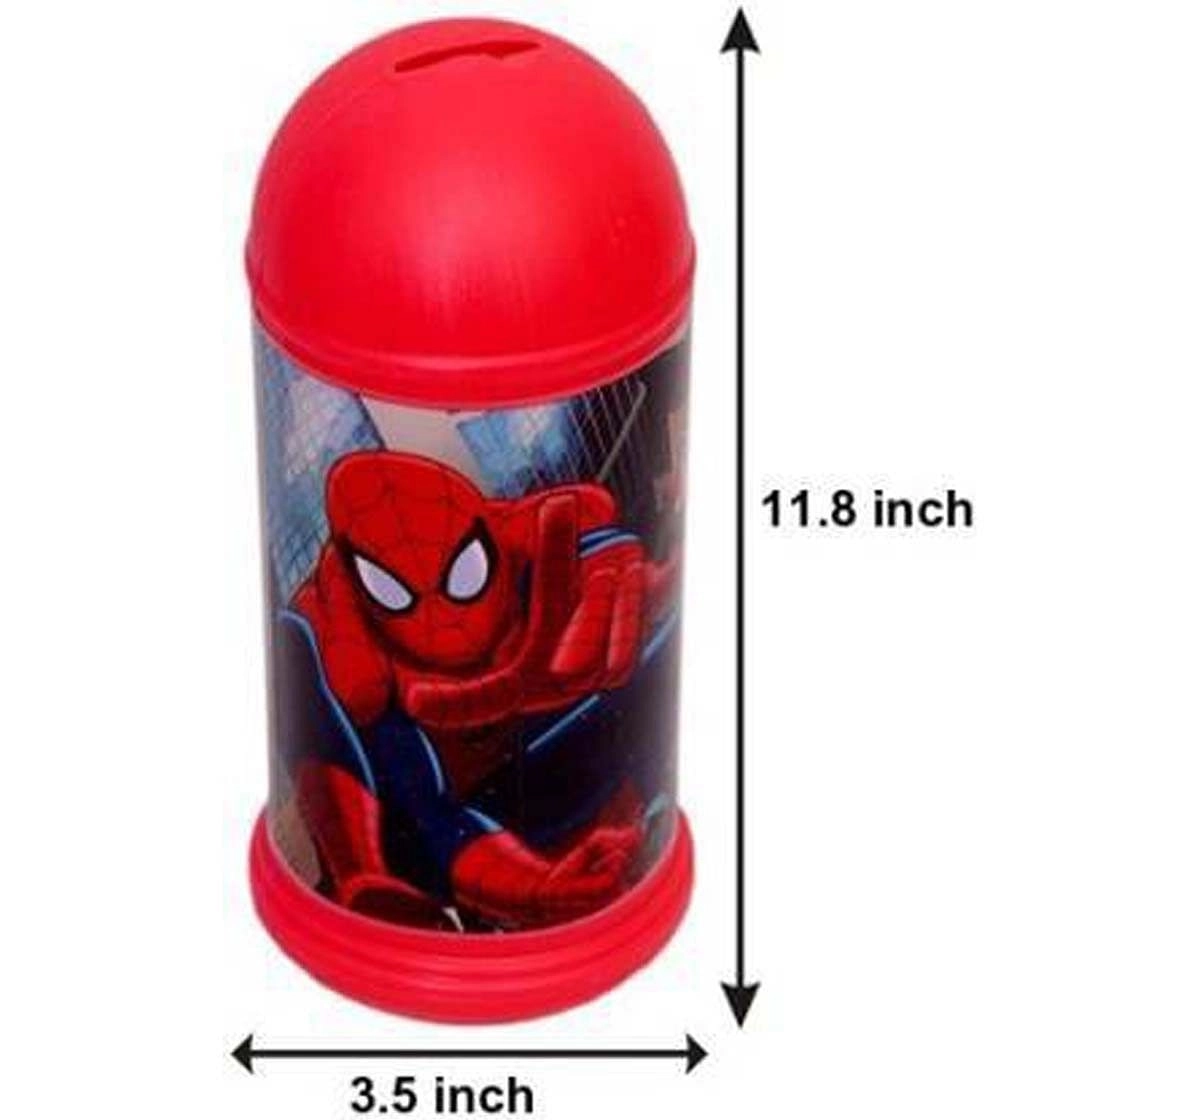 IToys Marvel Spidrman Coin Bank Novelty for Kids Age 4Y+